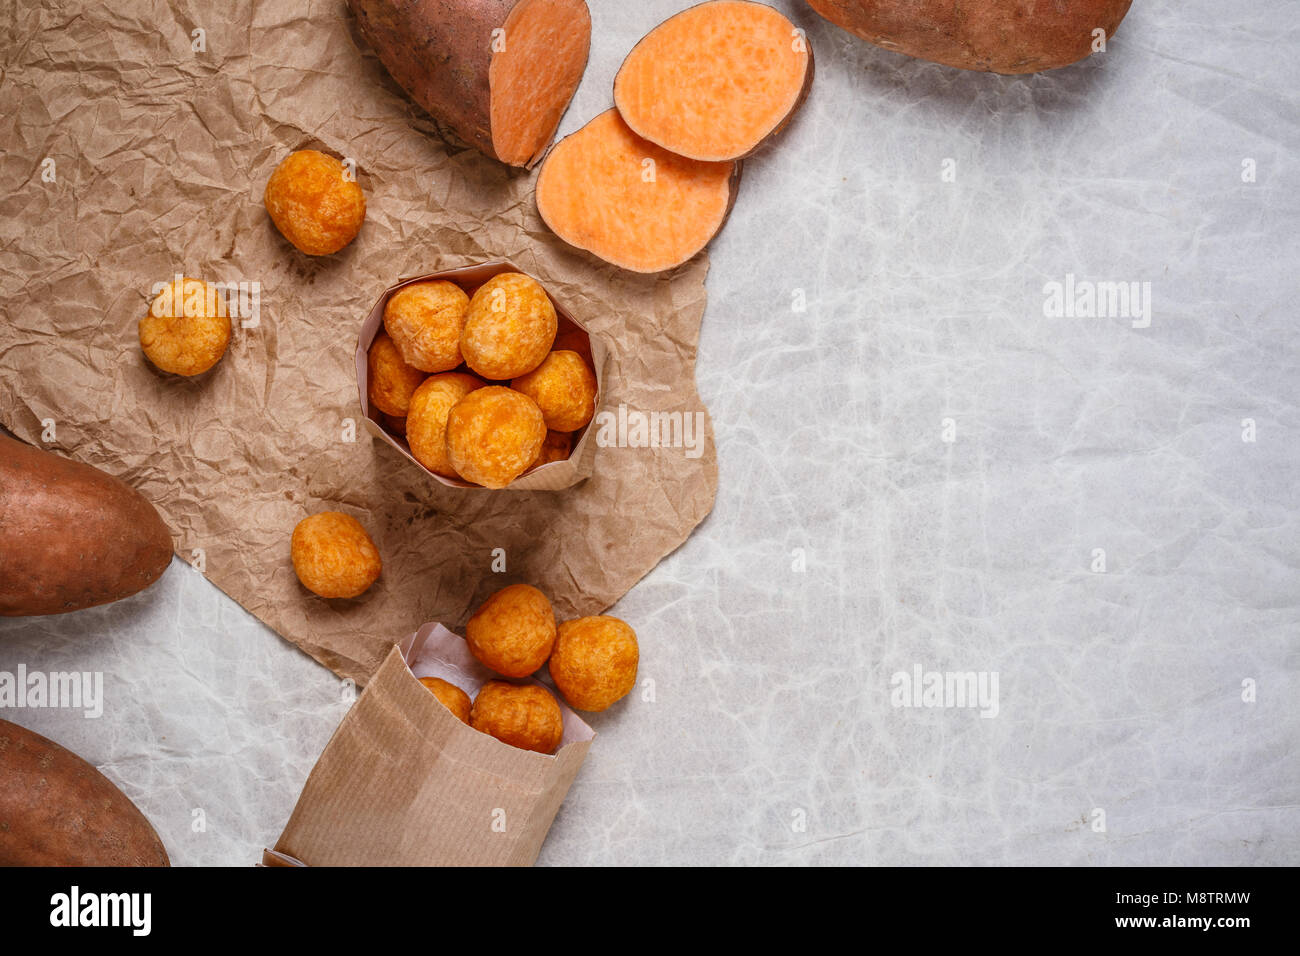 Fried sweet potato balls with space for your text Stock Photo